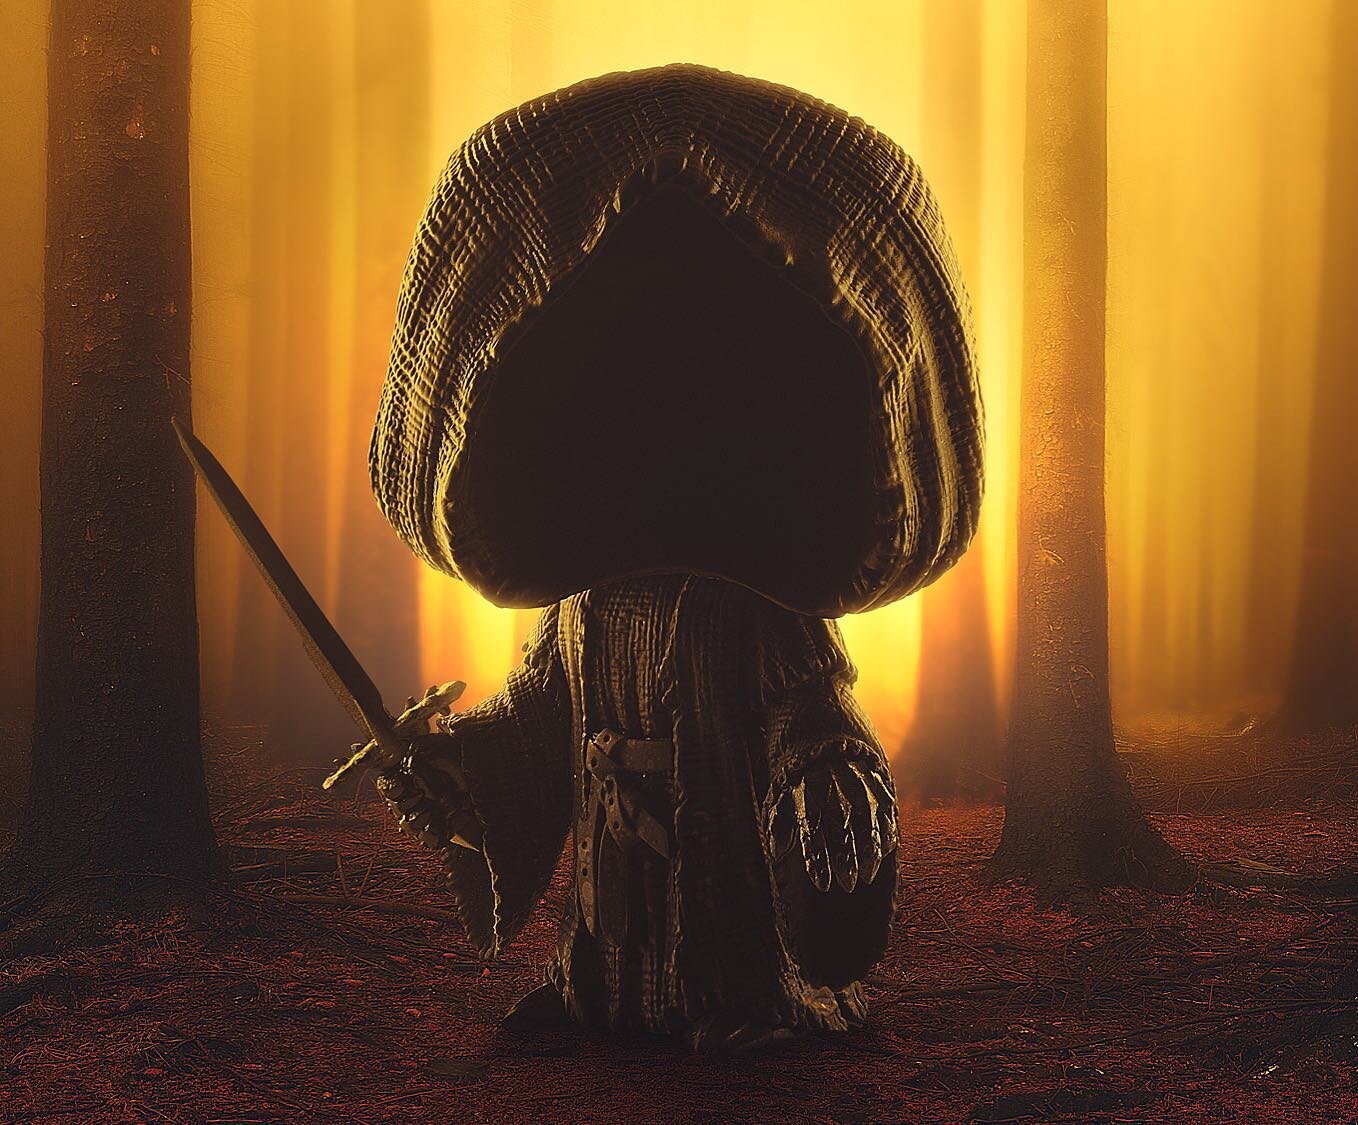 Anyone watching the new LOTR show on Amazon? I haven&rsquo;t seen it yet but hoping it&rsquo;s good! Here&rsquo;s a new addition to our LOTR highlight section!

&mdash;&mdash;&mdash;&mdash;&mdash;&mdash;&mdash;&mdash;&mdash;&mdash;&mdash;
🍽 @darksid